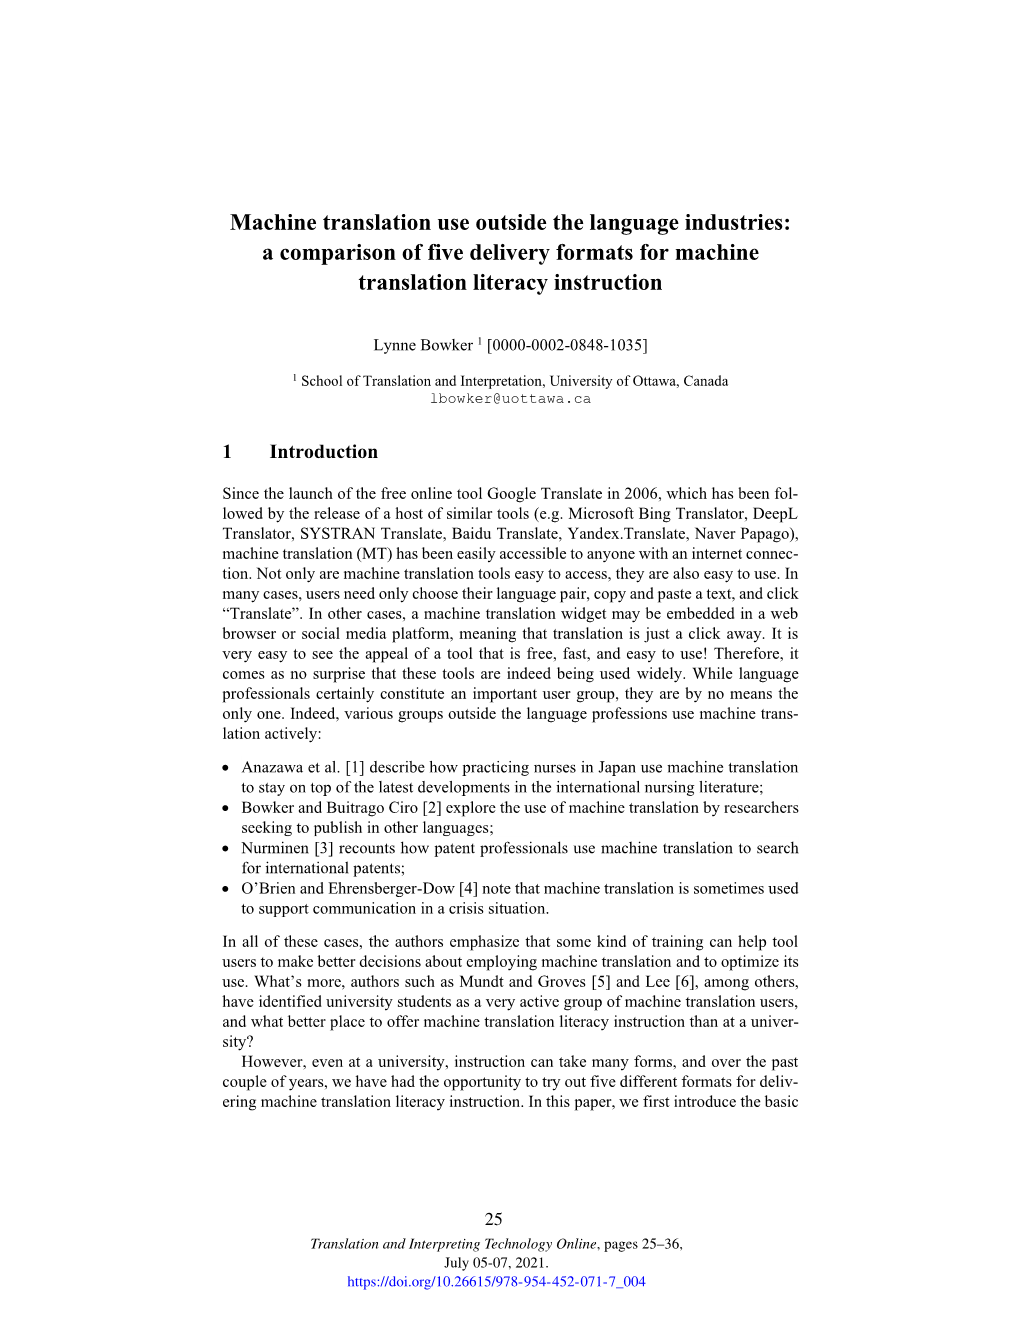 A Comparison of Five Delivery Formats for Machine Translation Literacy Instruction